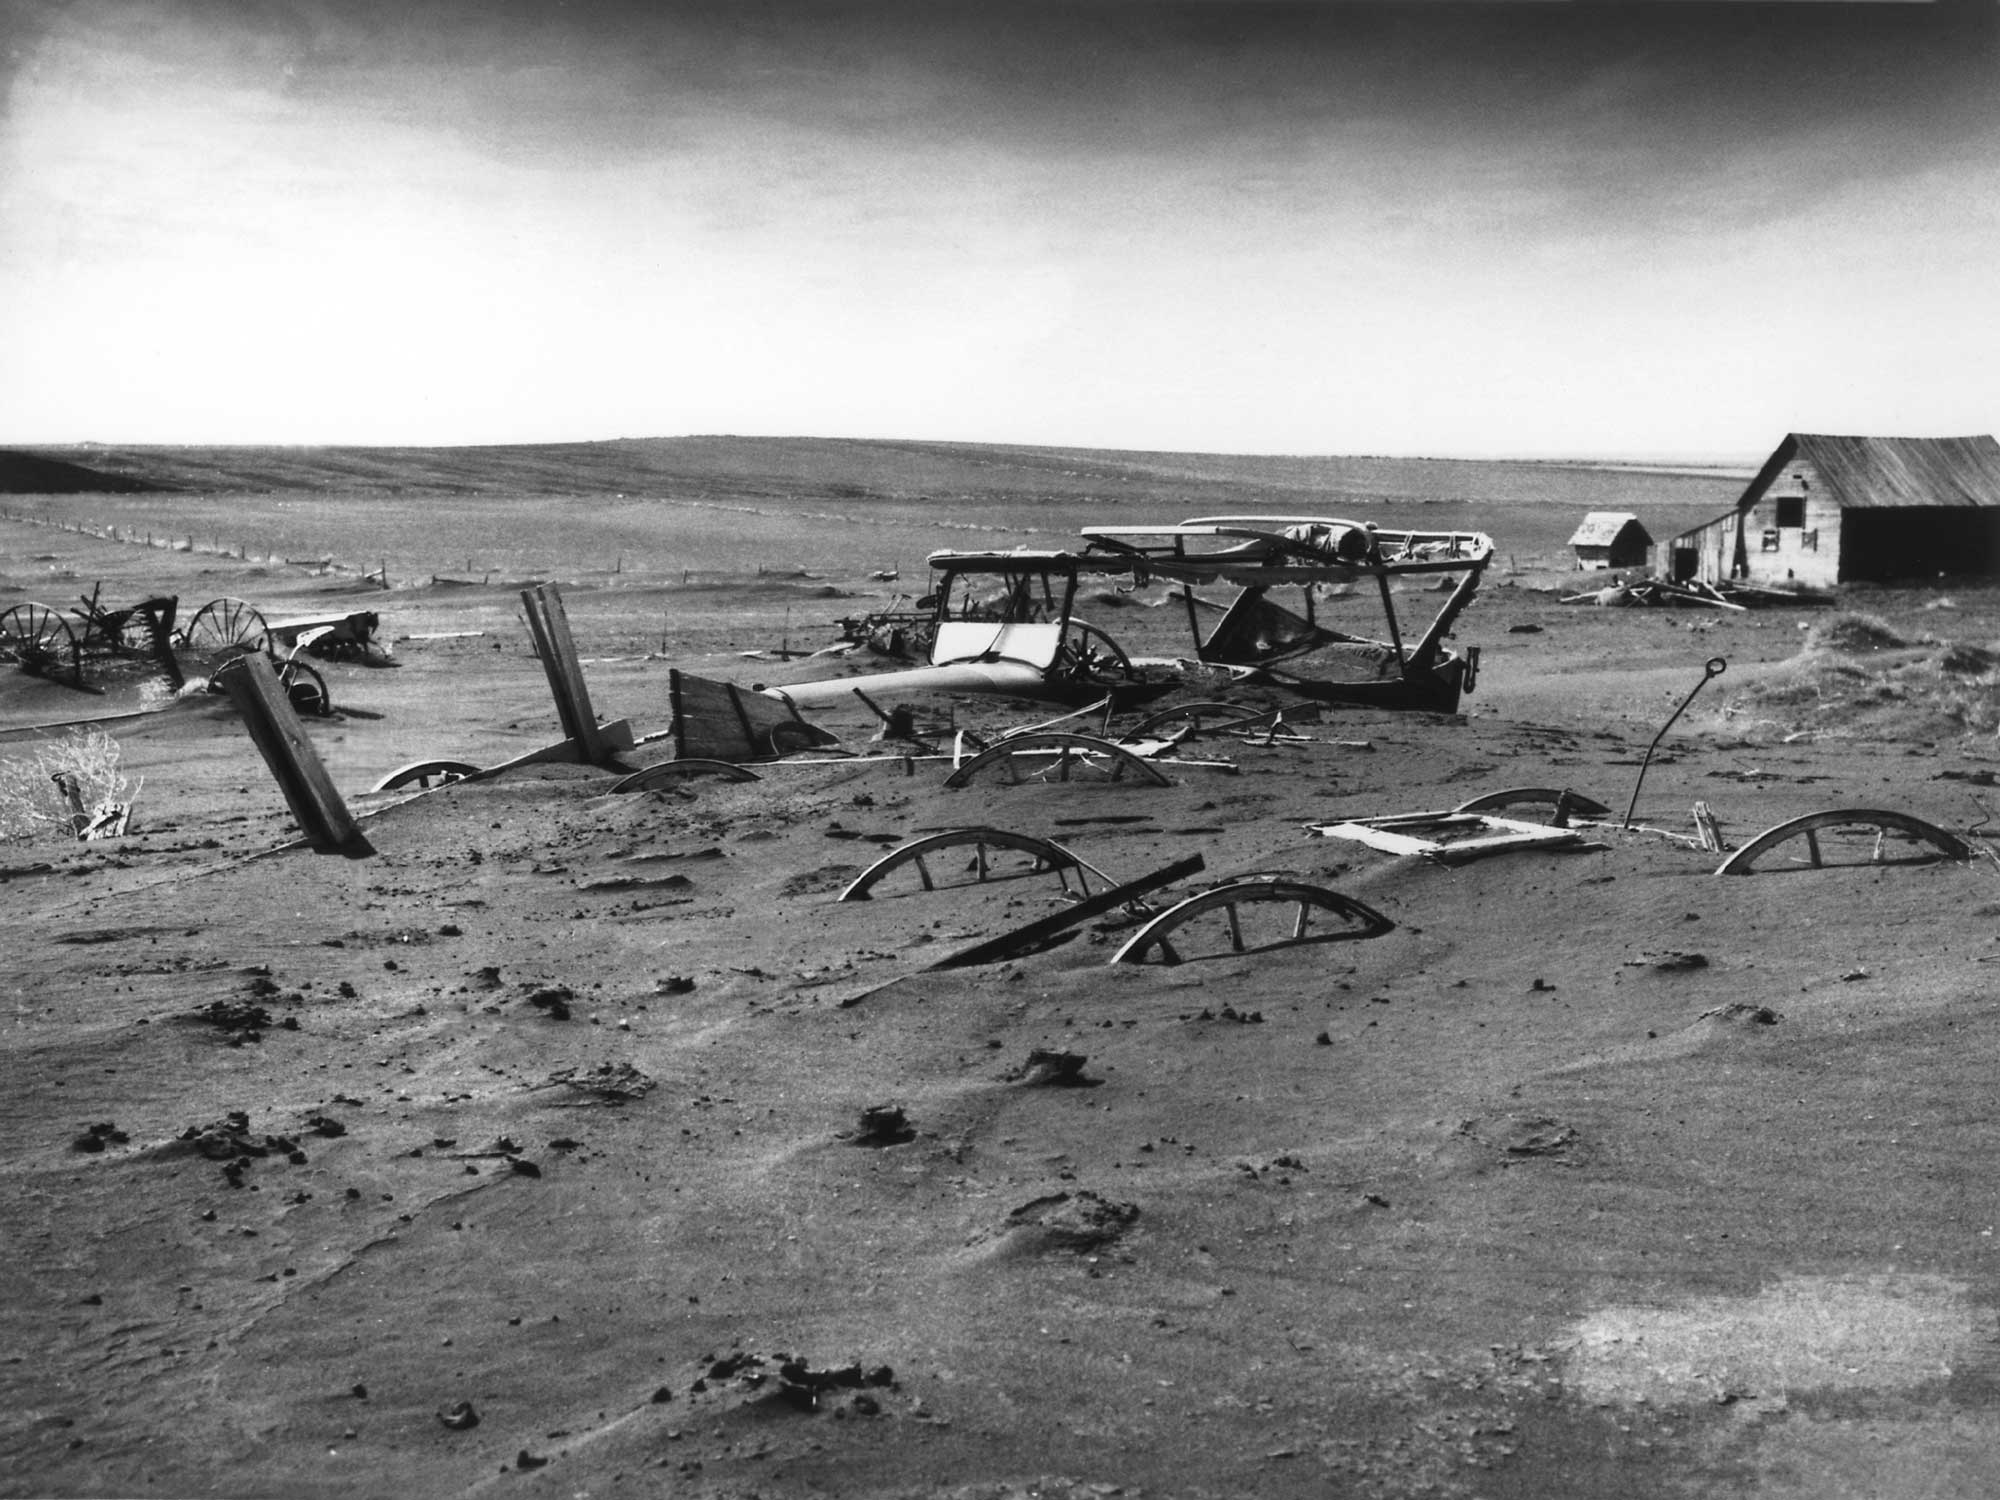 Historical photograph of a car buried during the Dust Bowl in South Dakota during the 1930s.